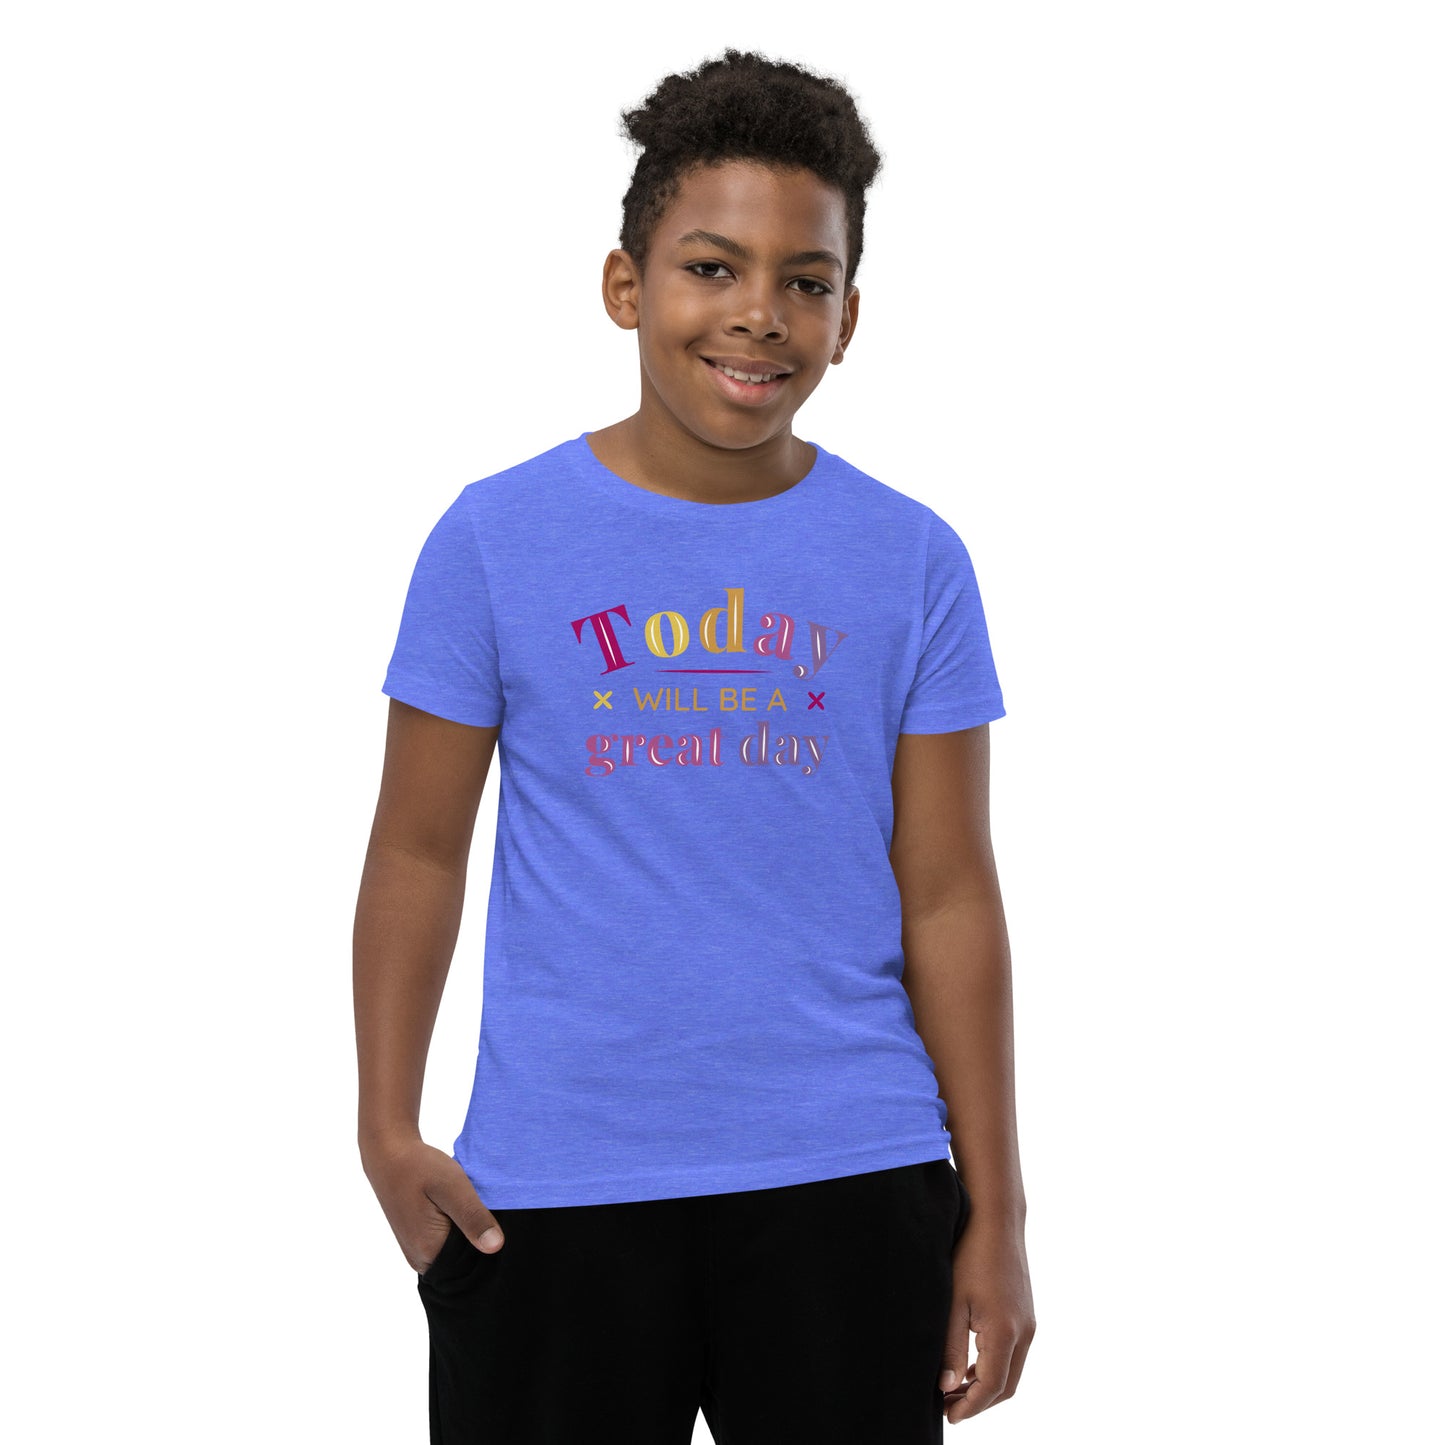 Today Will Be A Great Day Youth Short Sleeve T-Shirt